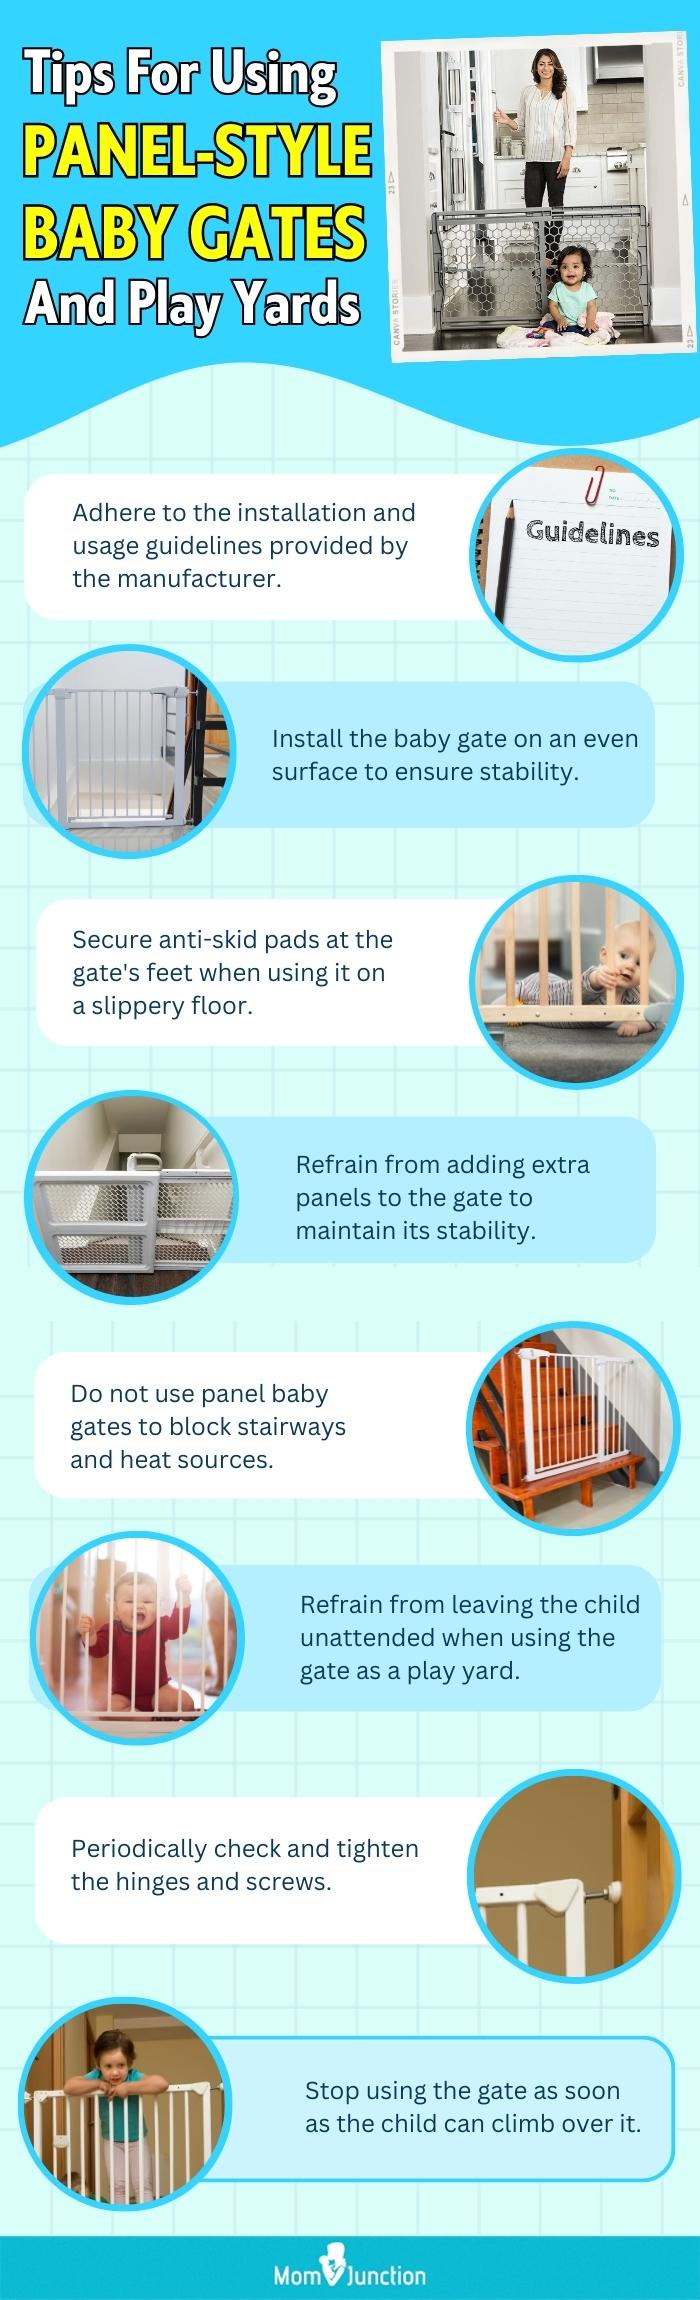 Tips For Using Panel-Style Baby Gates And Play Yards (infographic)